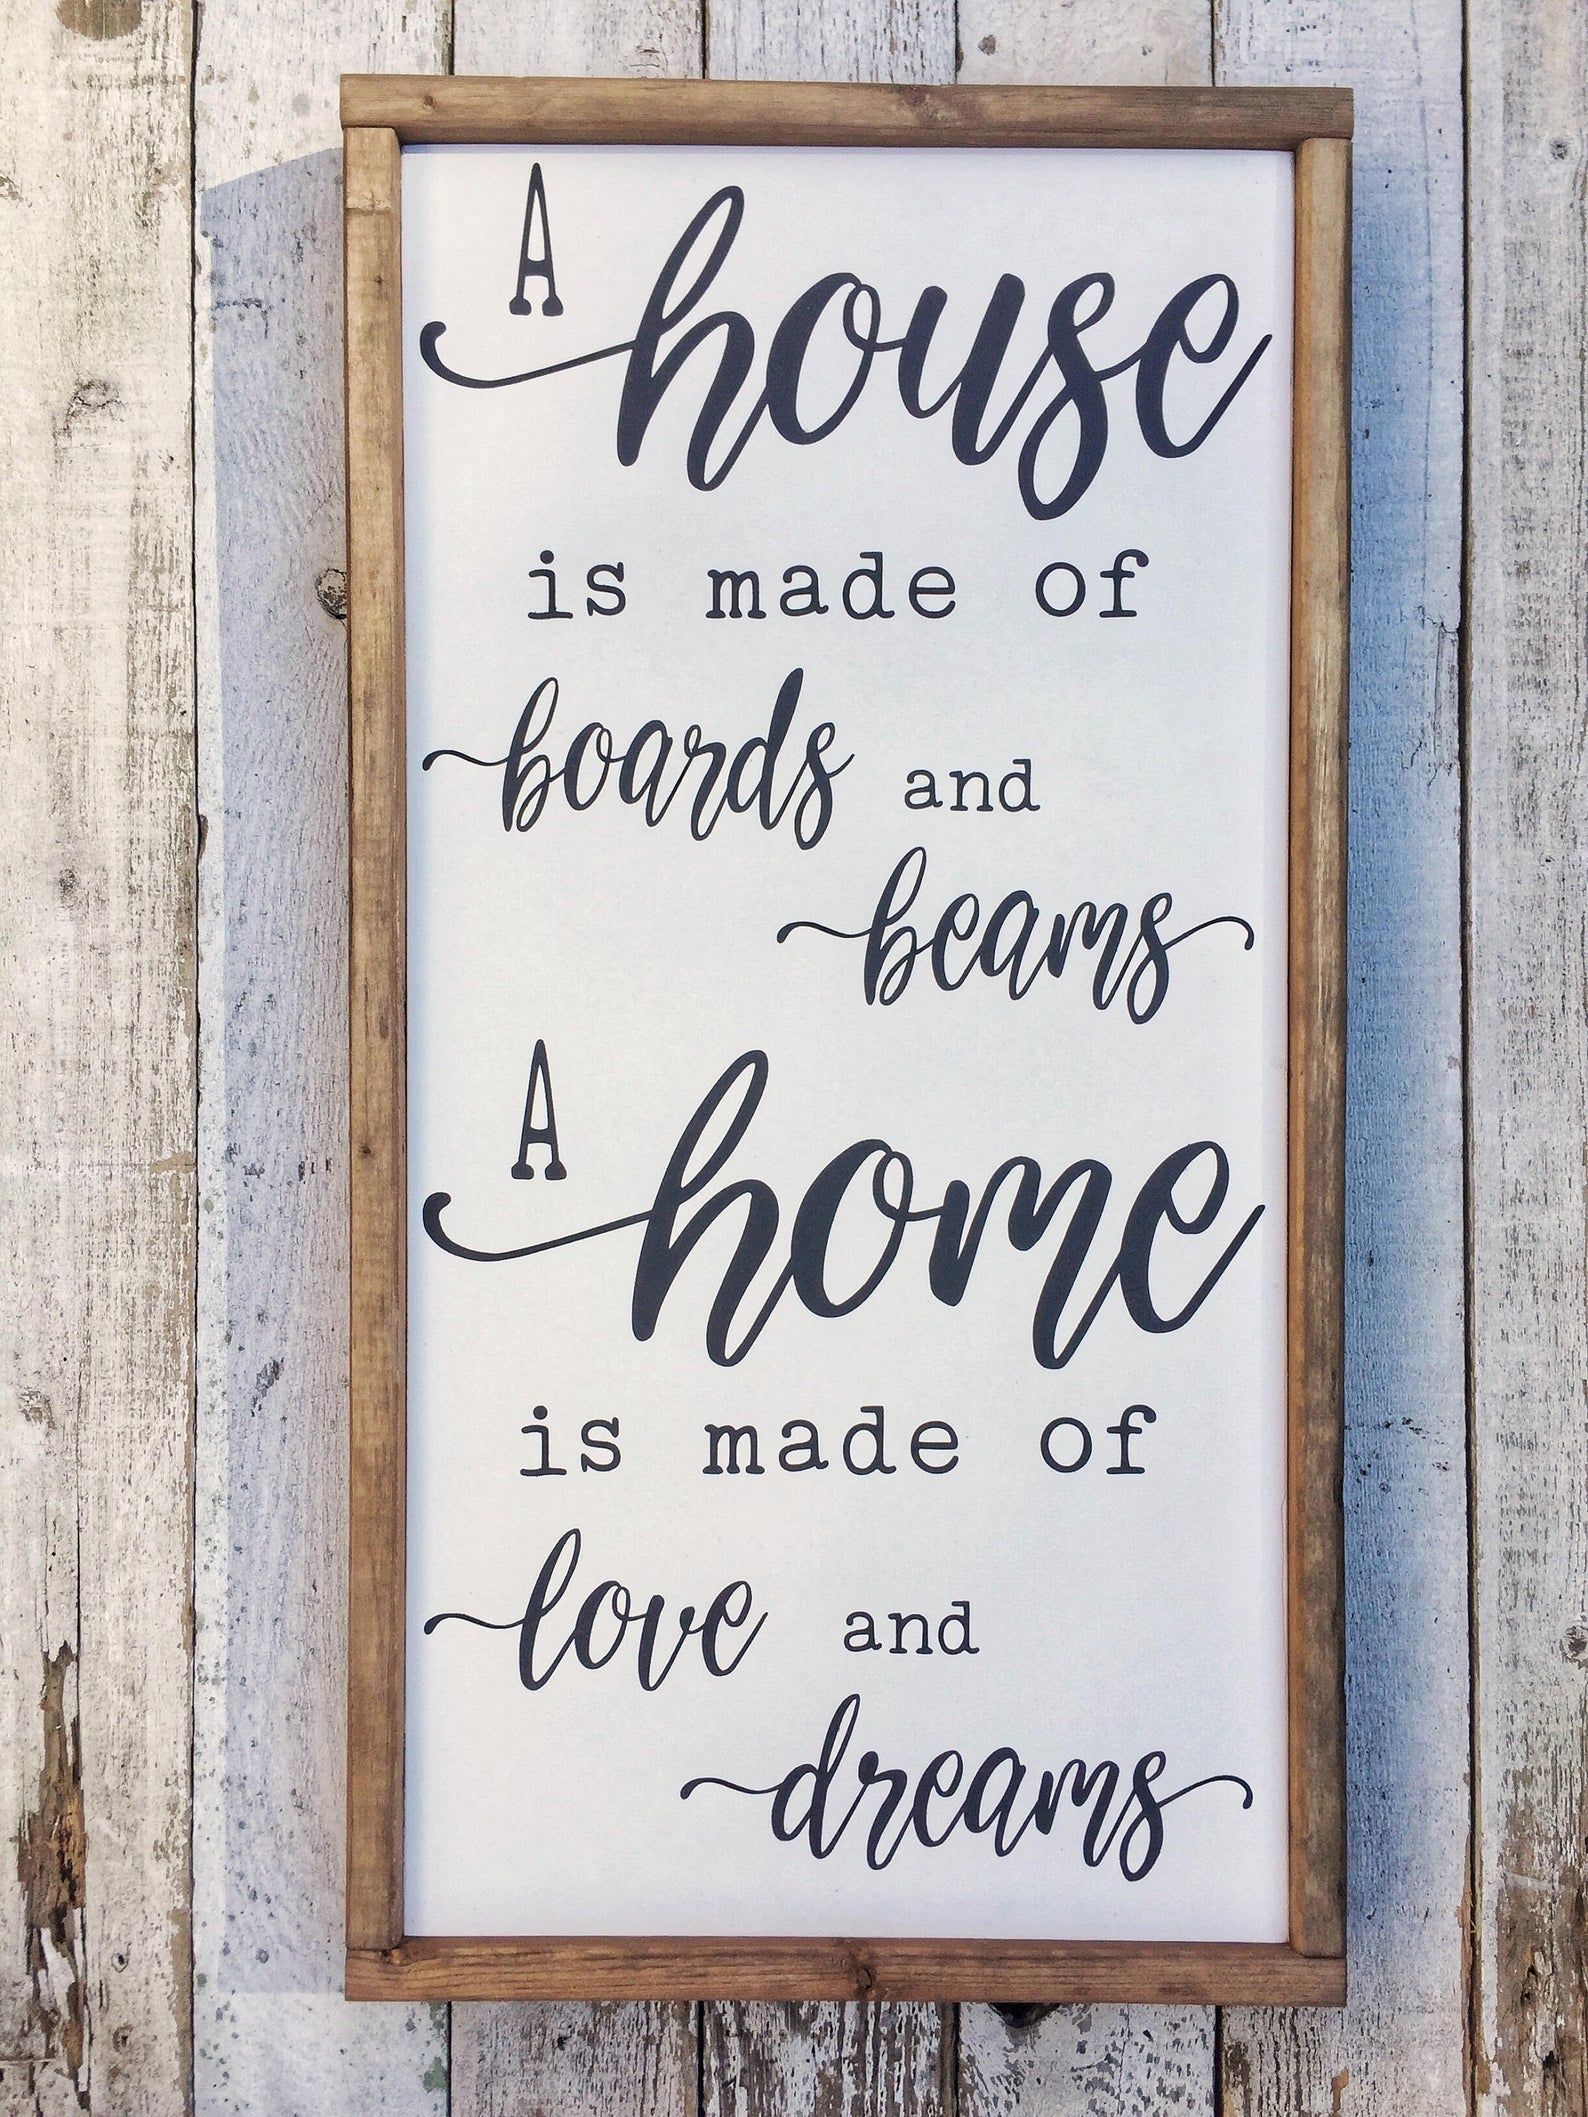 A House is Made of Boards and Beams, A Home is Made of Love and Dreams -   20 home decor signs quote ideas